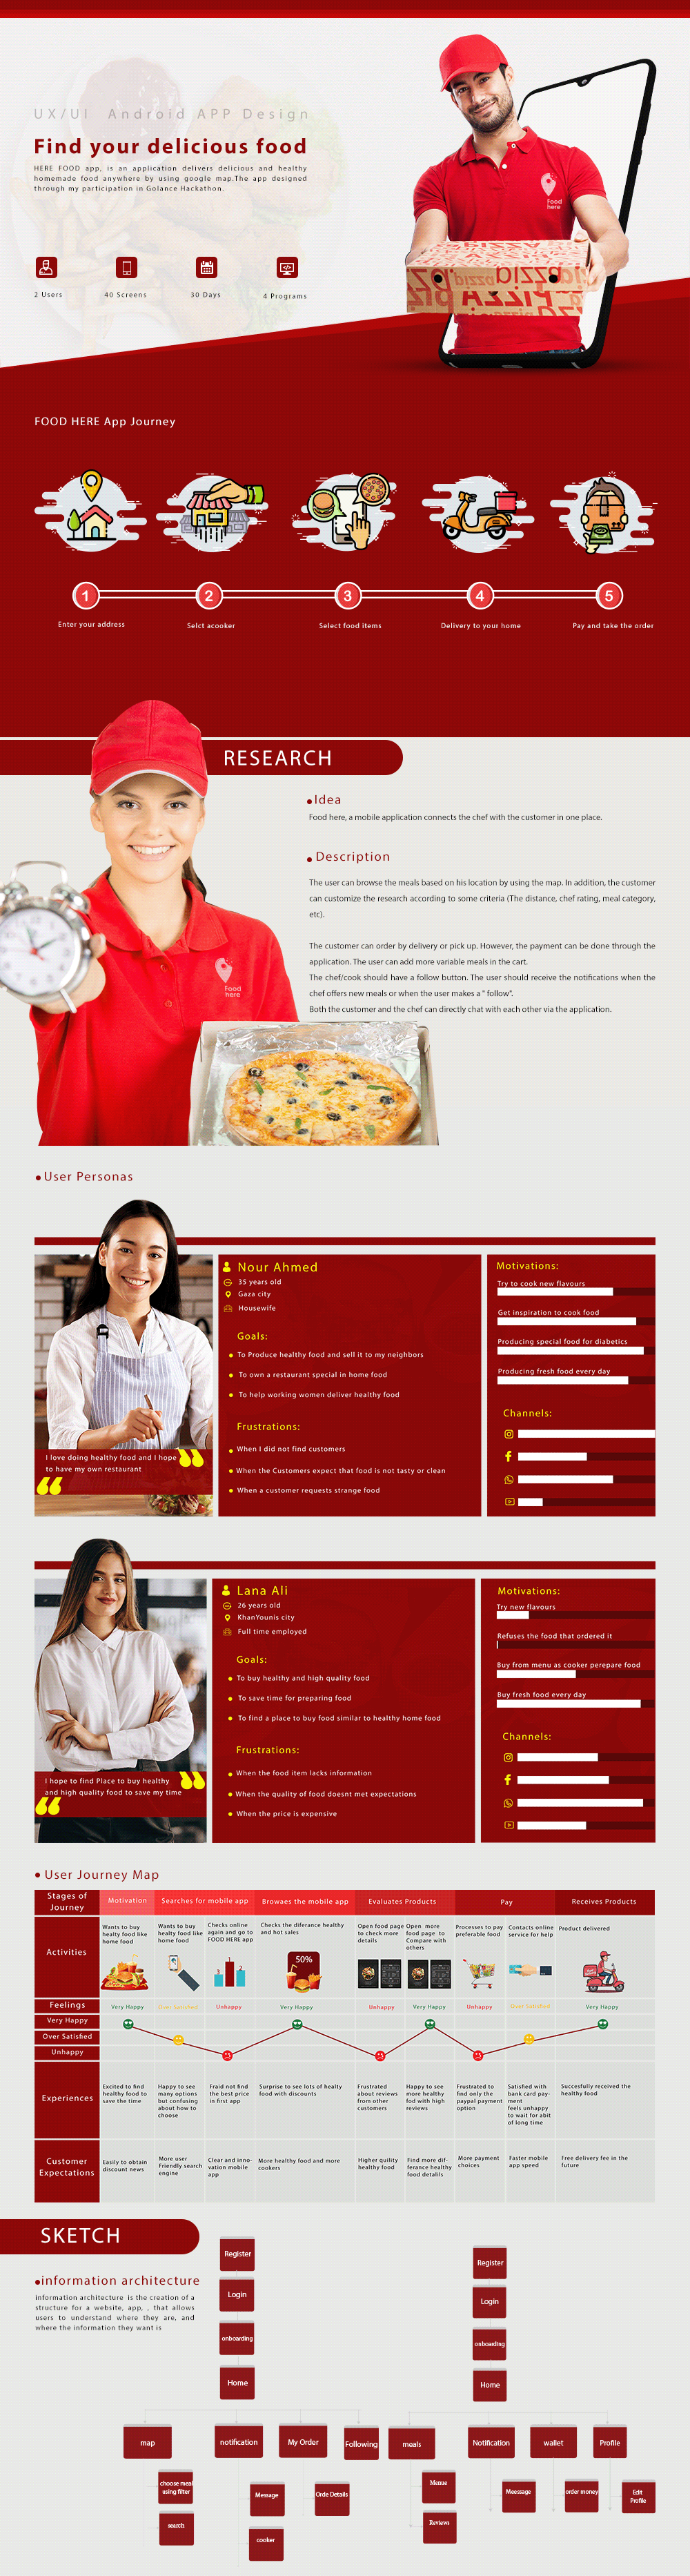 ux/ui food here app wireframe ui design persona user journey map app icons On Boarding sign up login